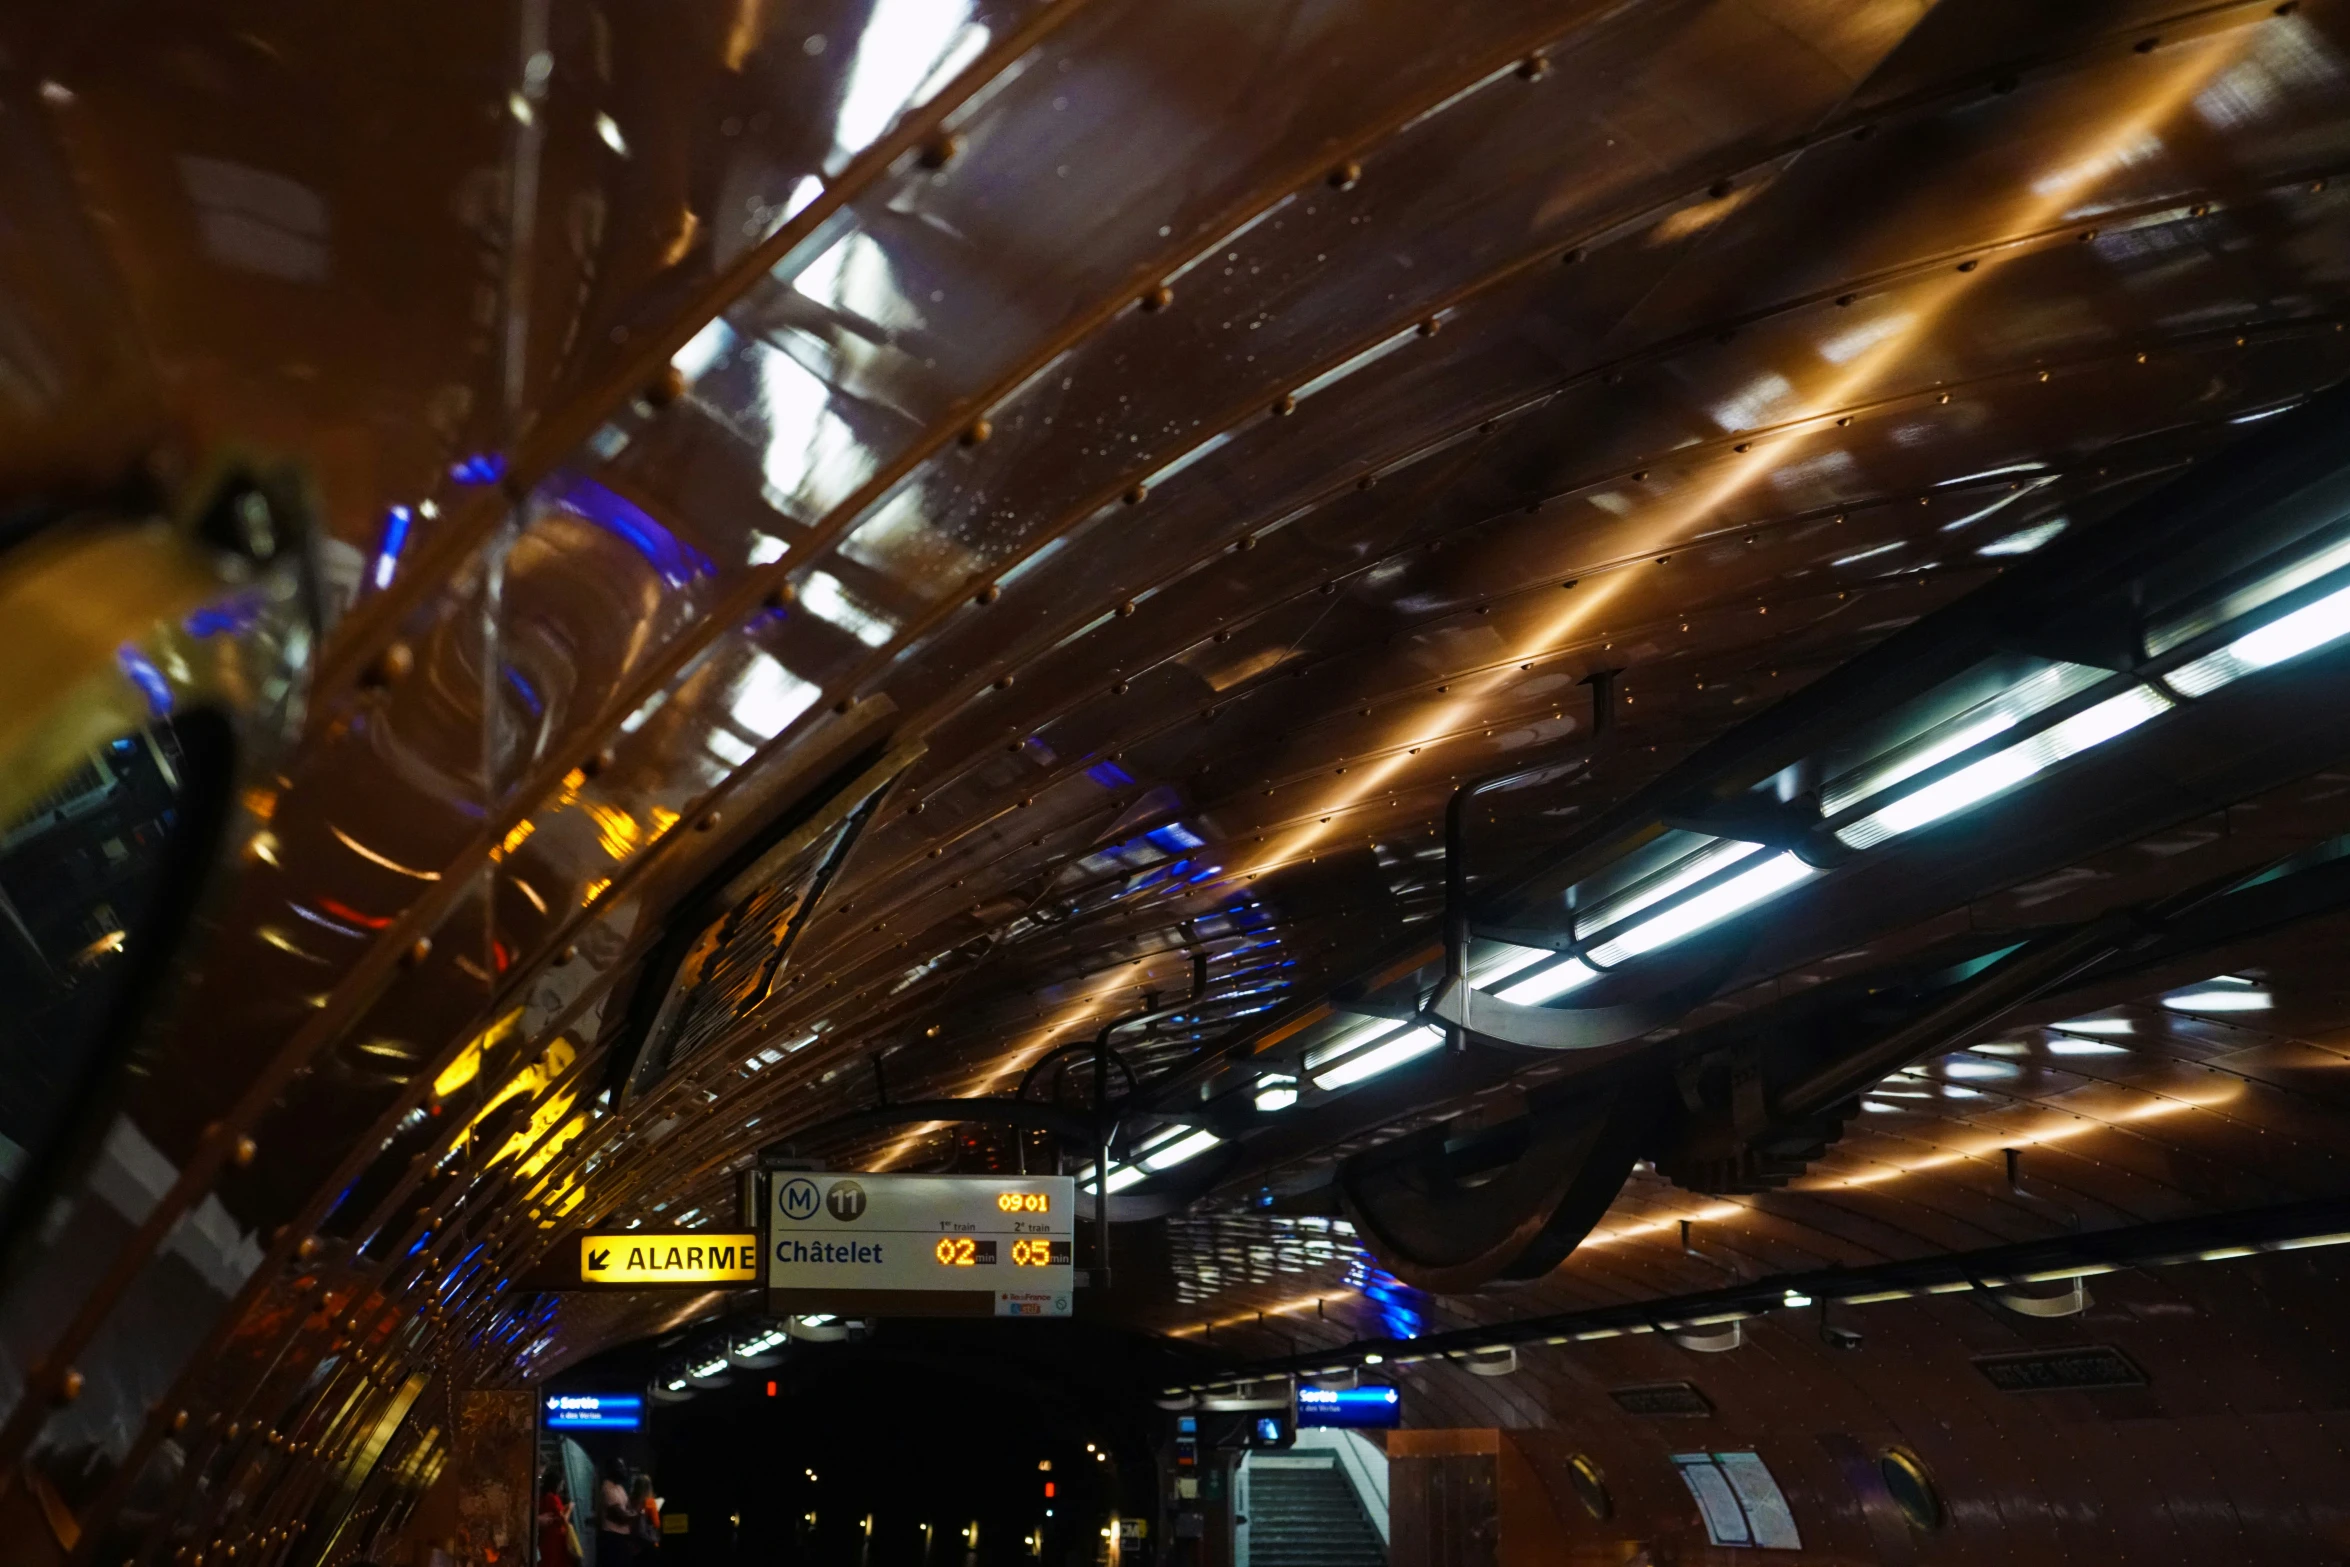 lights hang from the ceiling above a large subway car